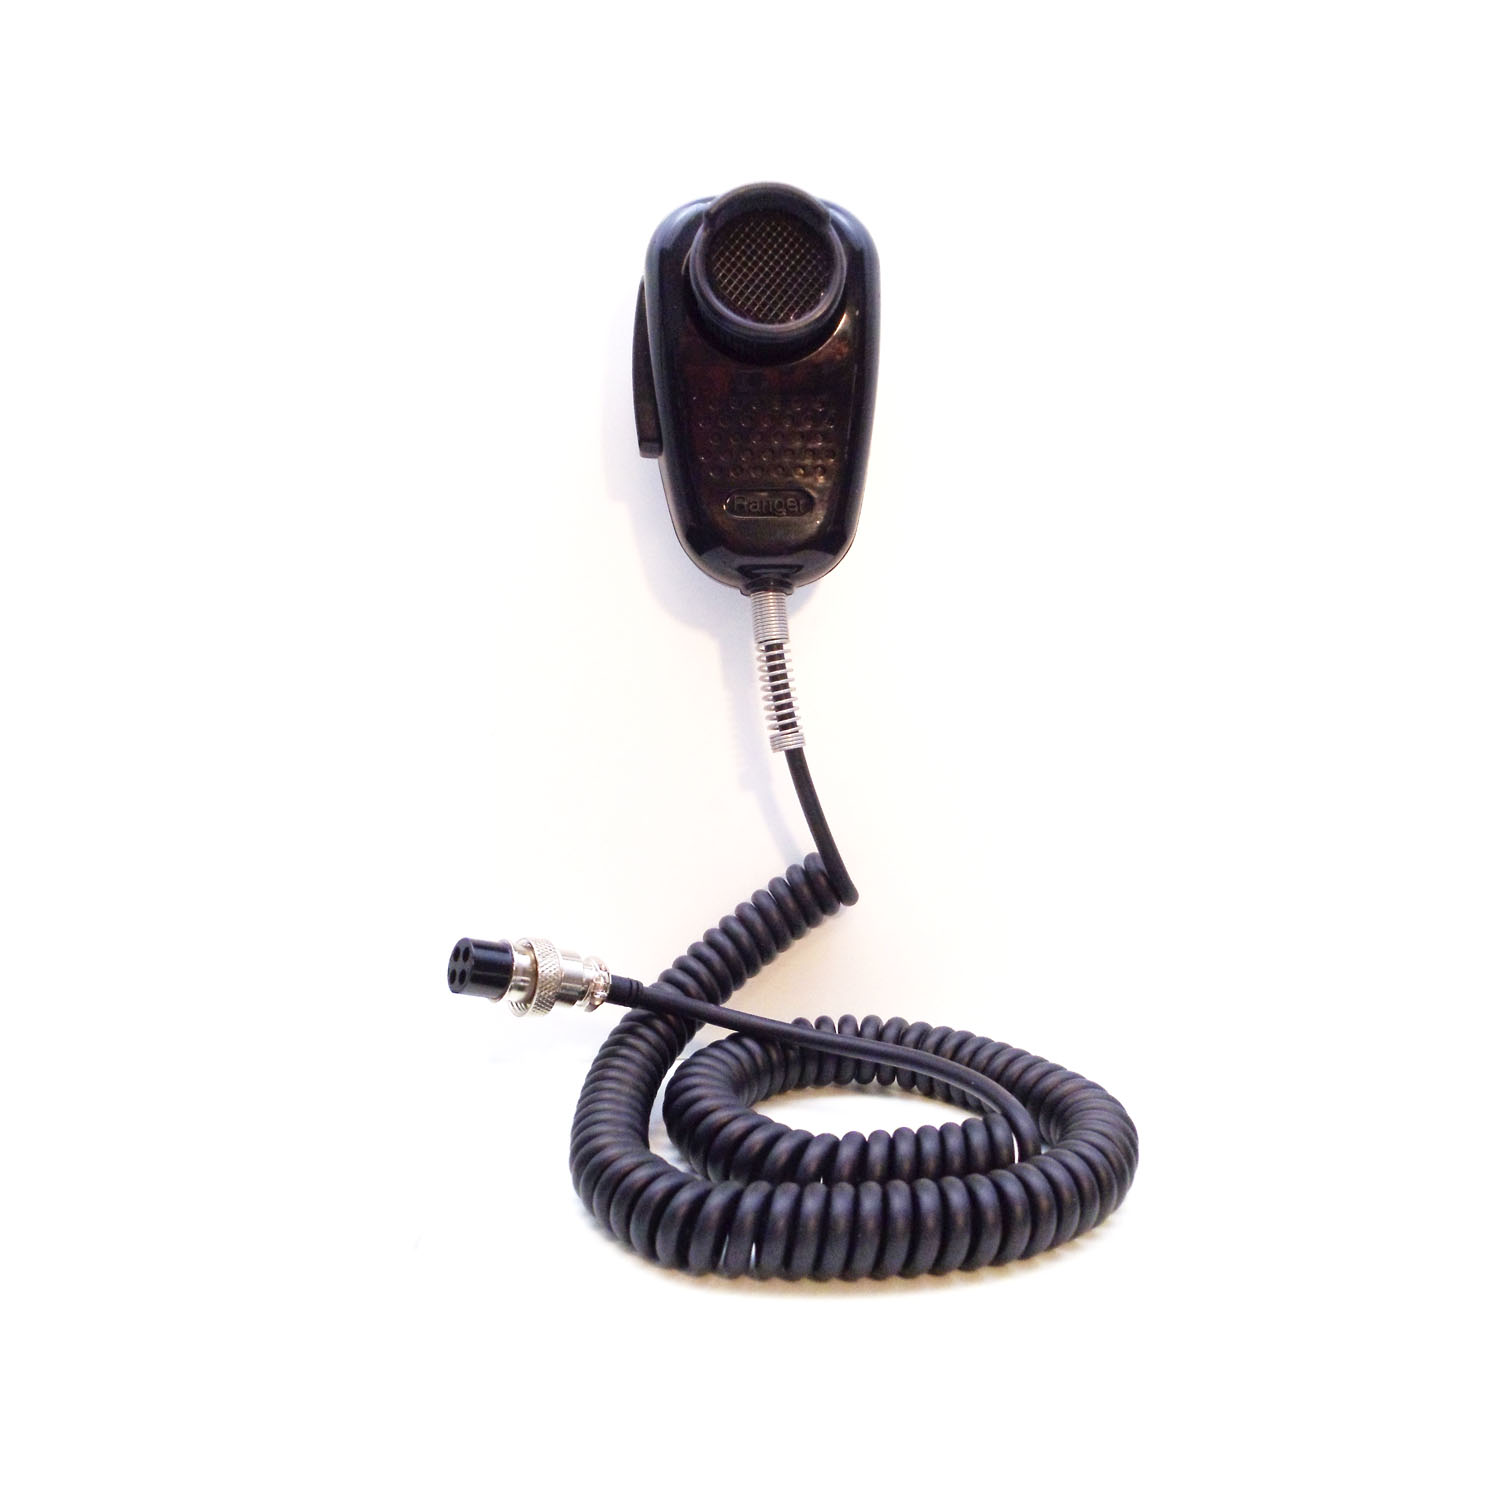 Ranger - Sra-198 Black Noise Cancelling Microphone Wired 4-Pin Standard For Cb & Ham Radios